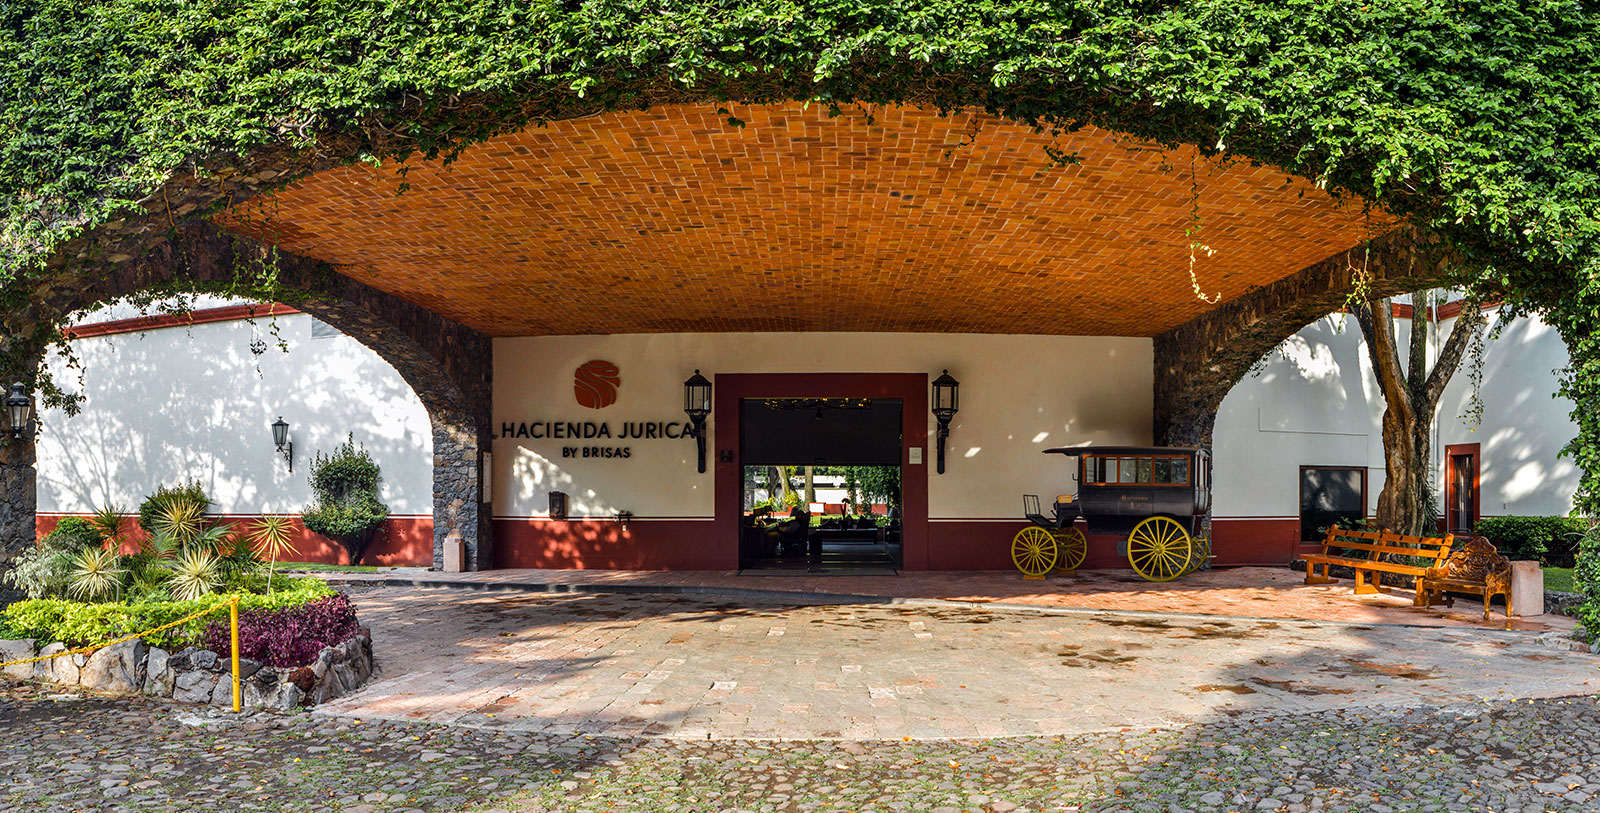 Image of Exterior, Hacienda Jurica by Brisas, Queretaro, Mexico, 1551, Member of Historic Hotels Worldwide, Special Offers, Discounted Rates, Families, Romantic Escape, Honeymoons, Anniversaries, Reunions